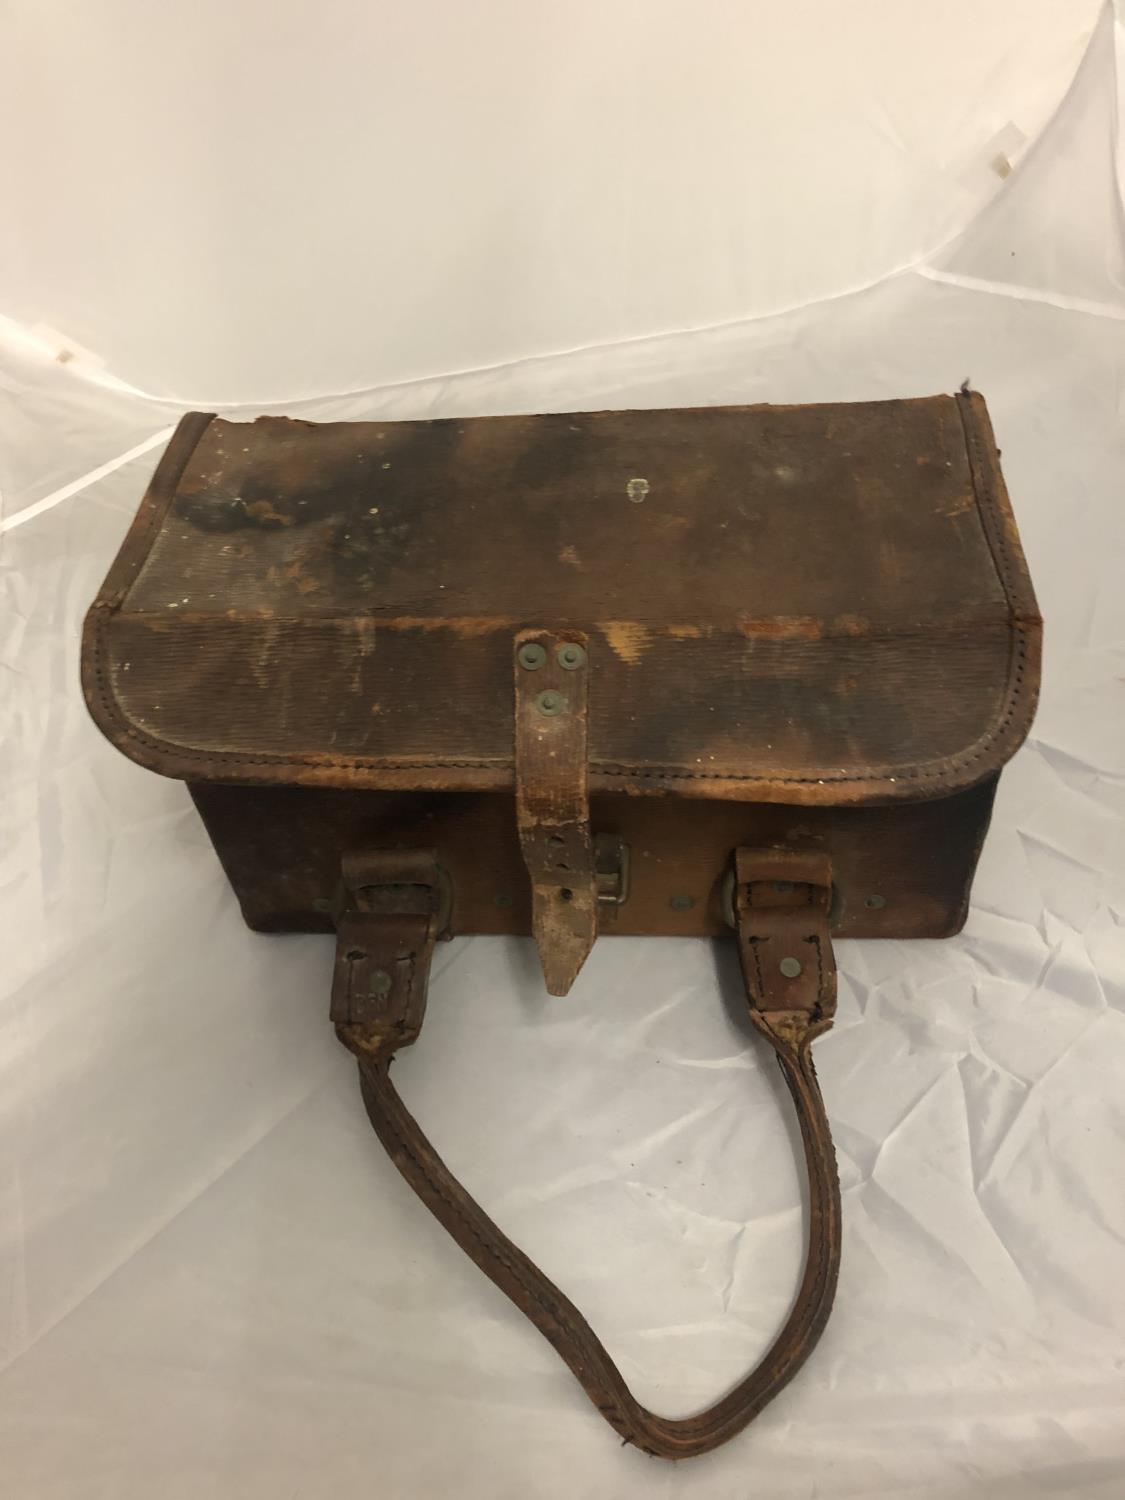 A BROWN LEATHER MILITARY BOX DATED 1954